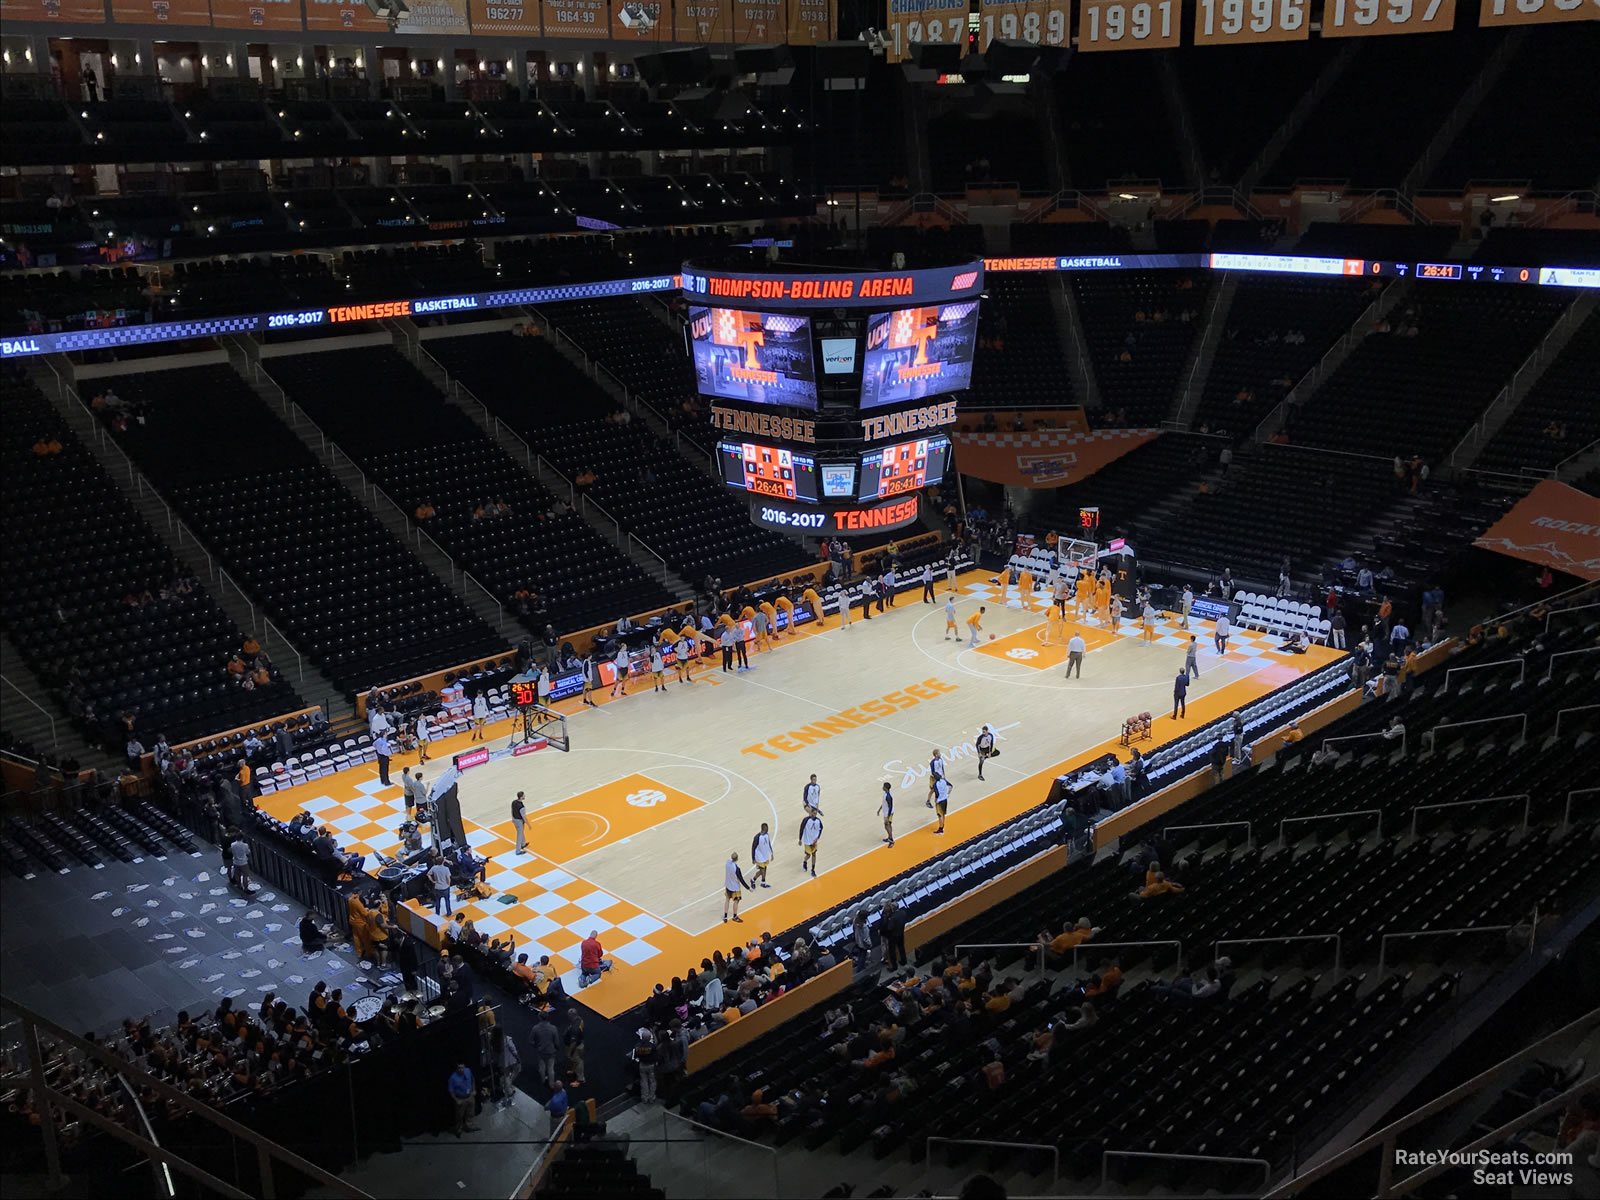 section 325, row 7 seat view  - thompson-boling arena